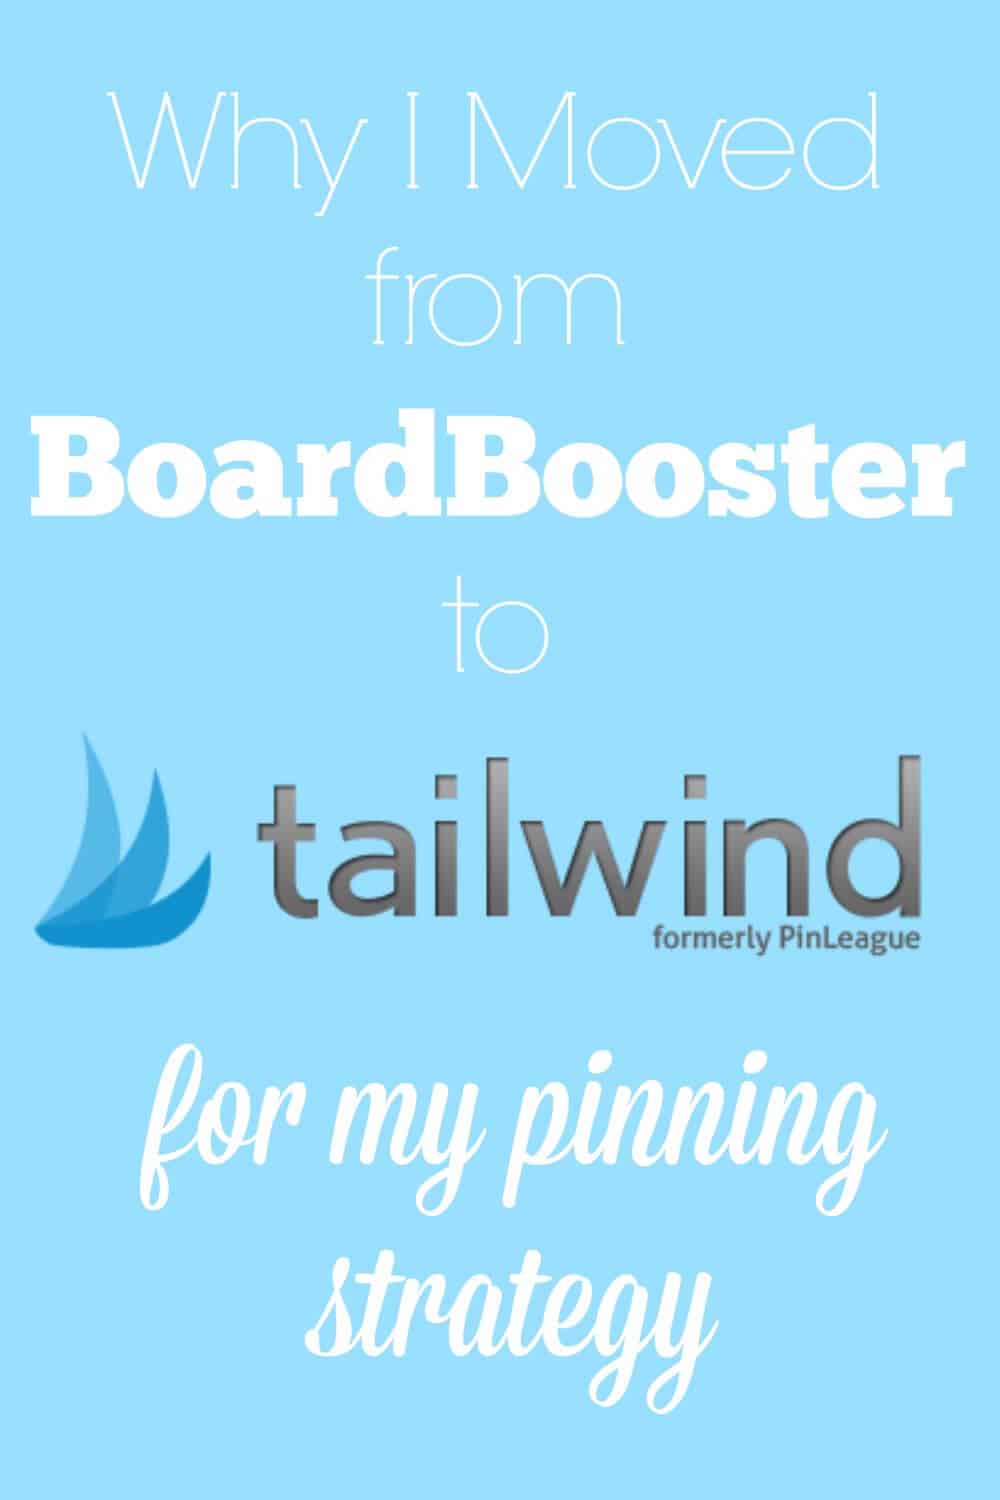 If you're a blogger you're probably using or considering using a pin scheduler. Here's why I decided to make the switch from BoardBooster to Tailwind.